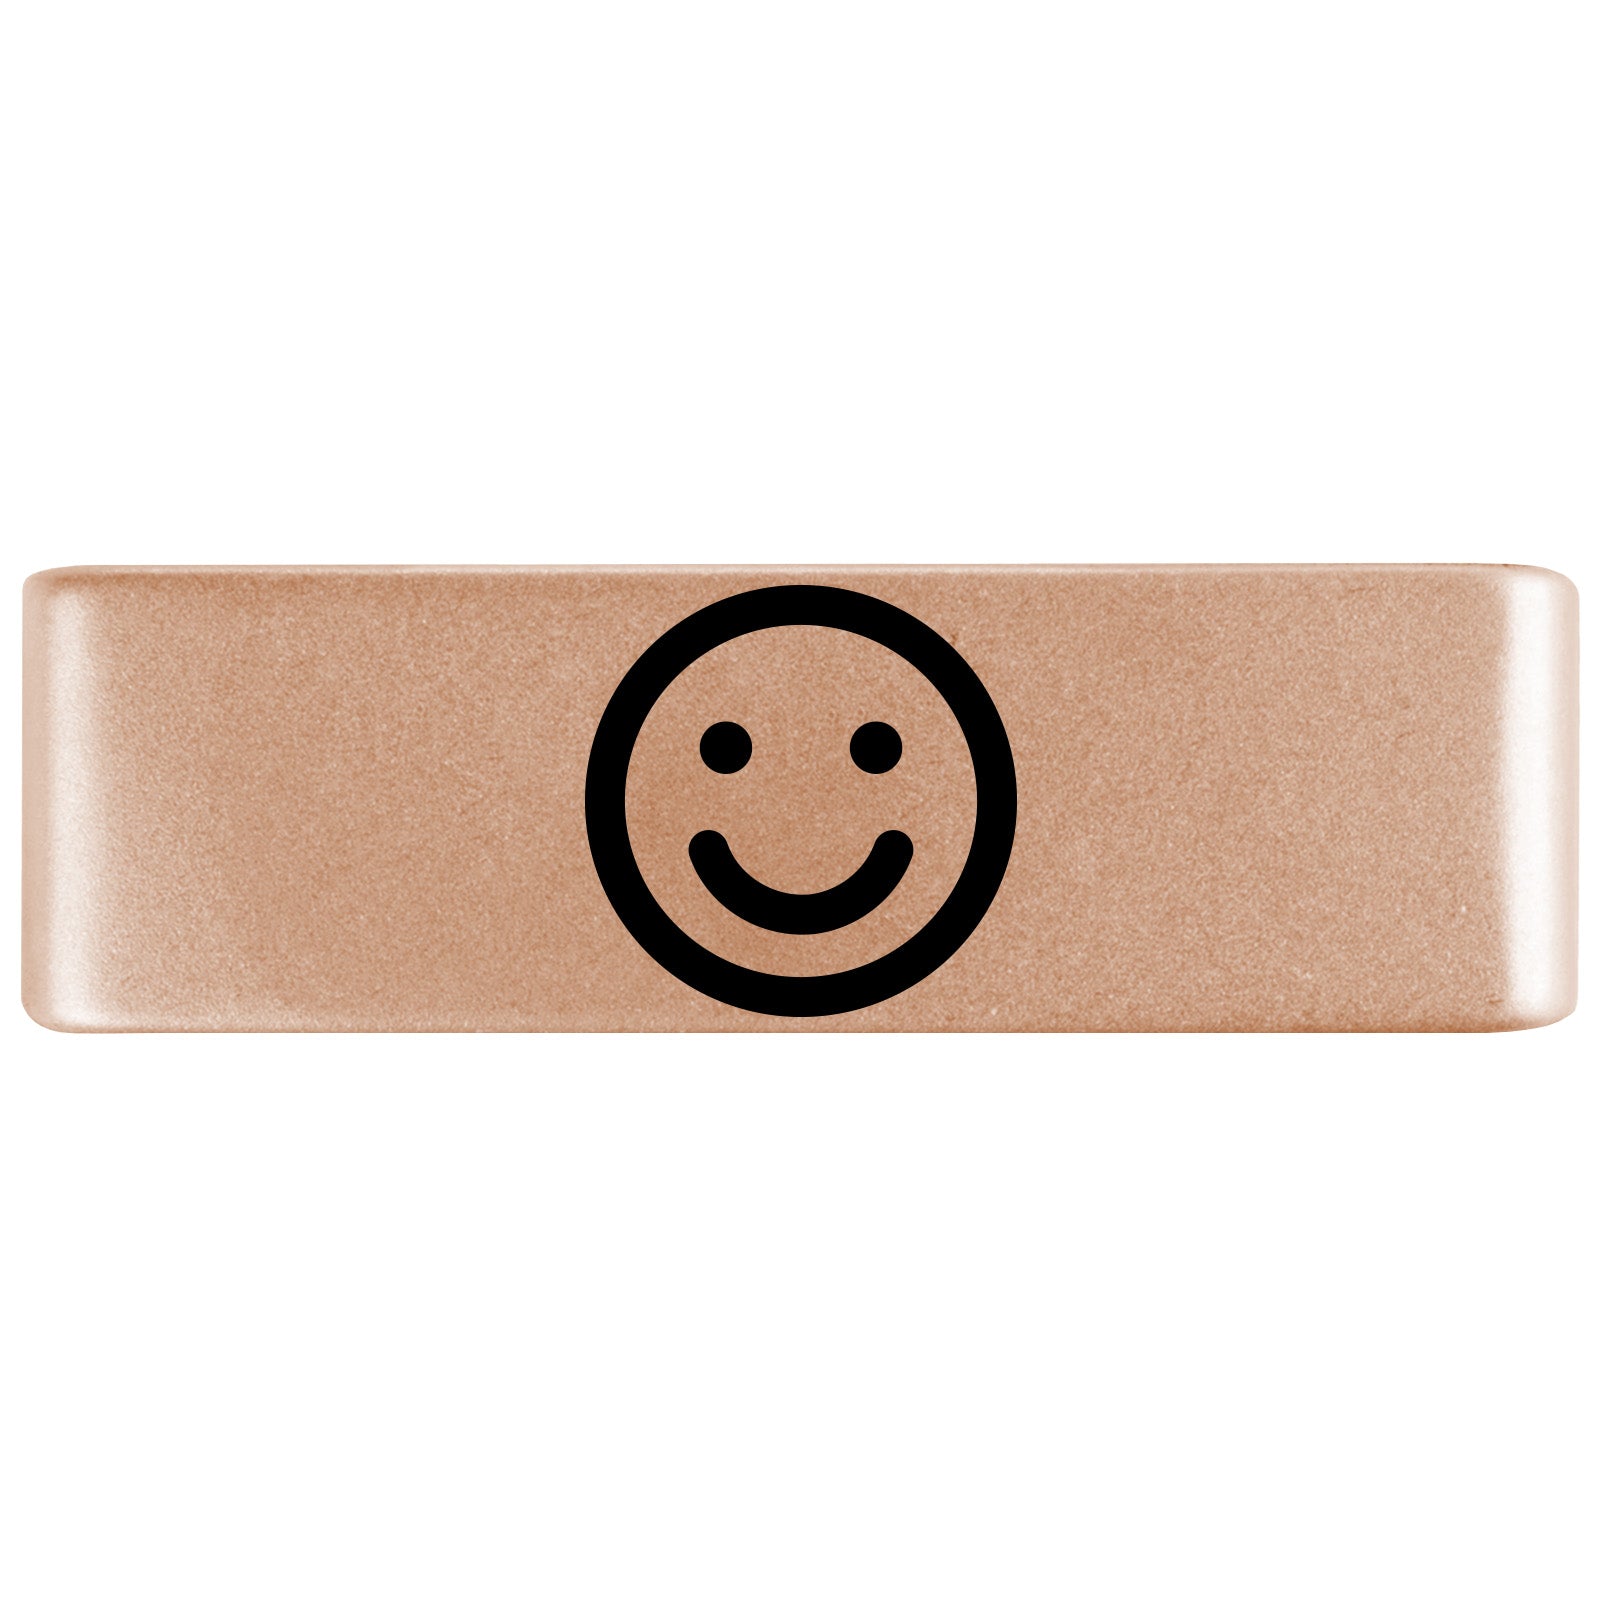 Smiley Face Badge Badge 19mm - ROAD iD